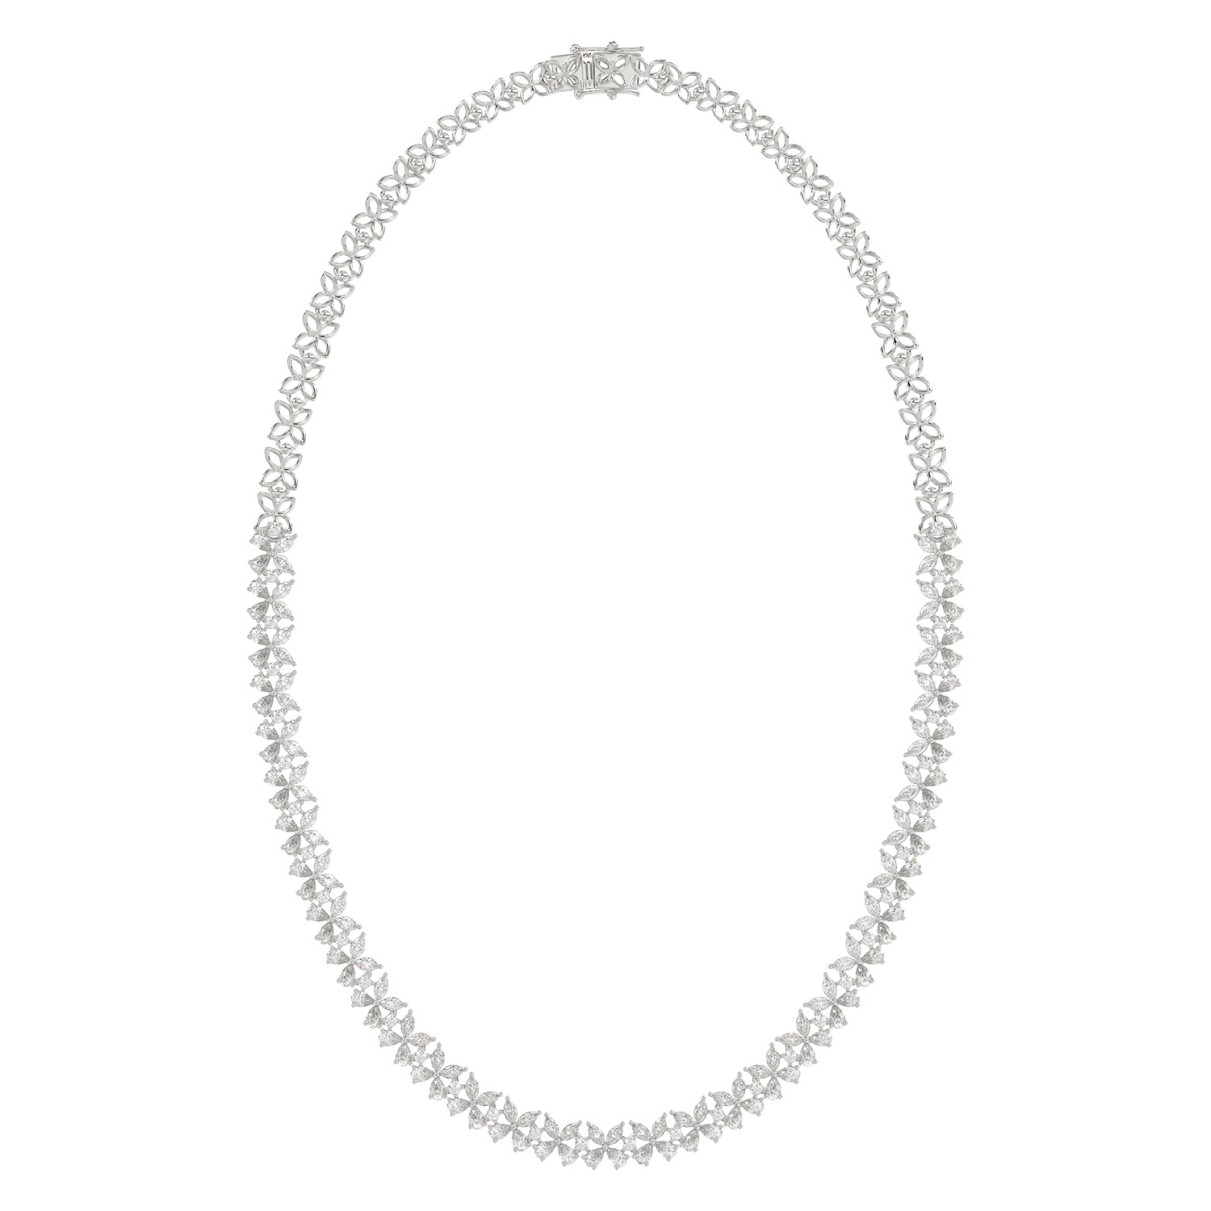 LADIES NECKLACE 19 1/2CT ROUND/PEAR/MARQUISE DIAMOND 14K WHITE GOLD